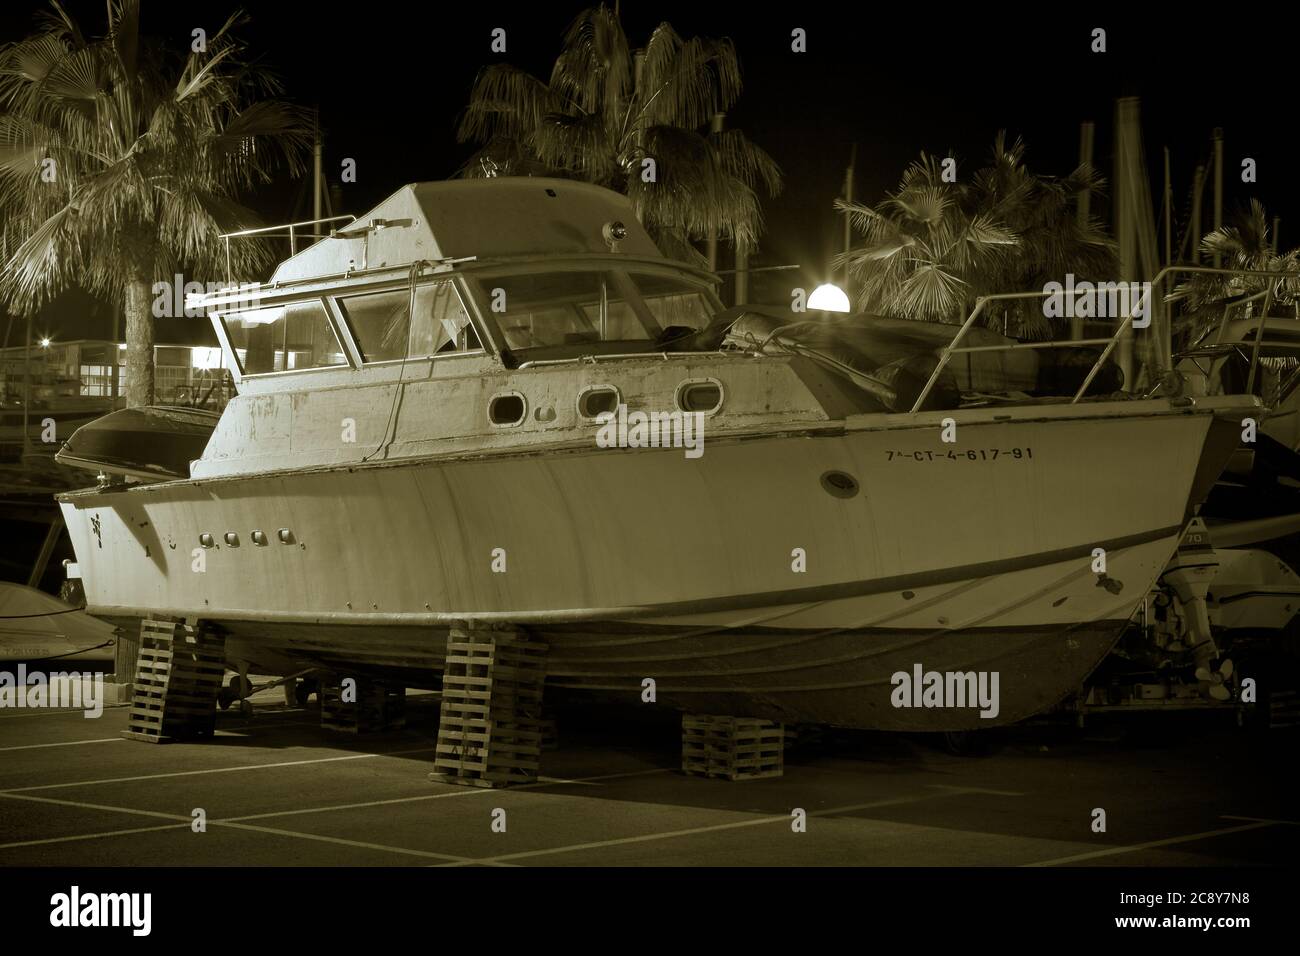 Boat in dry dock, inside the port surrounded by palm trees in monochrome and night shot. Stock Photo